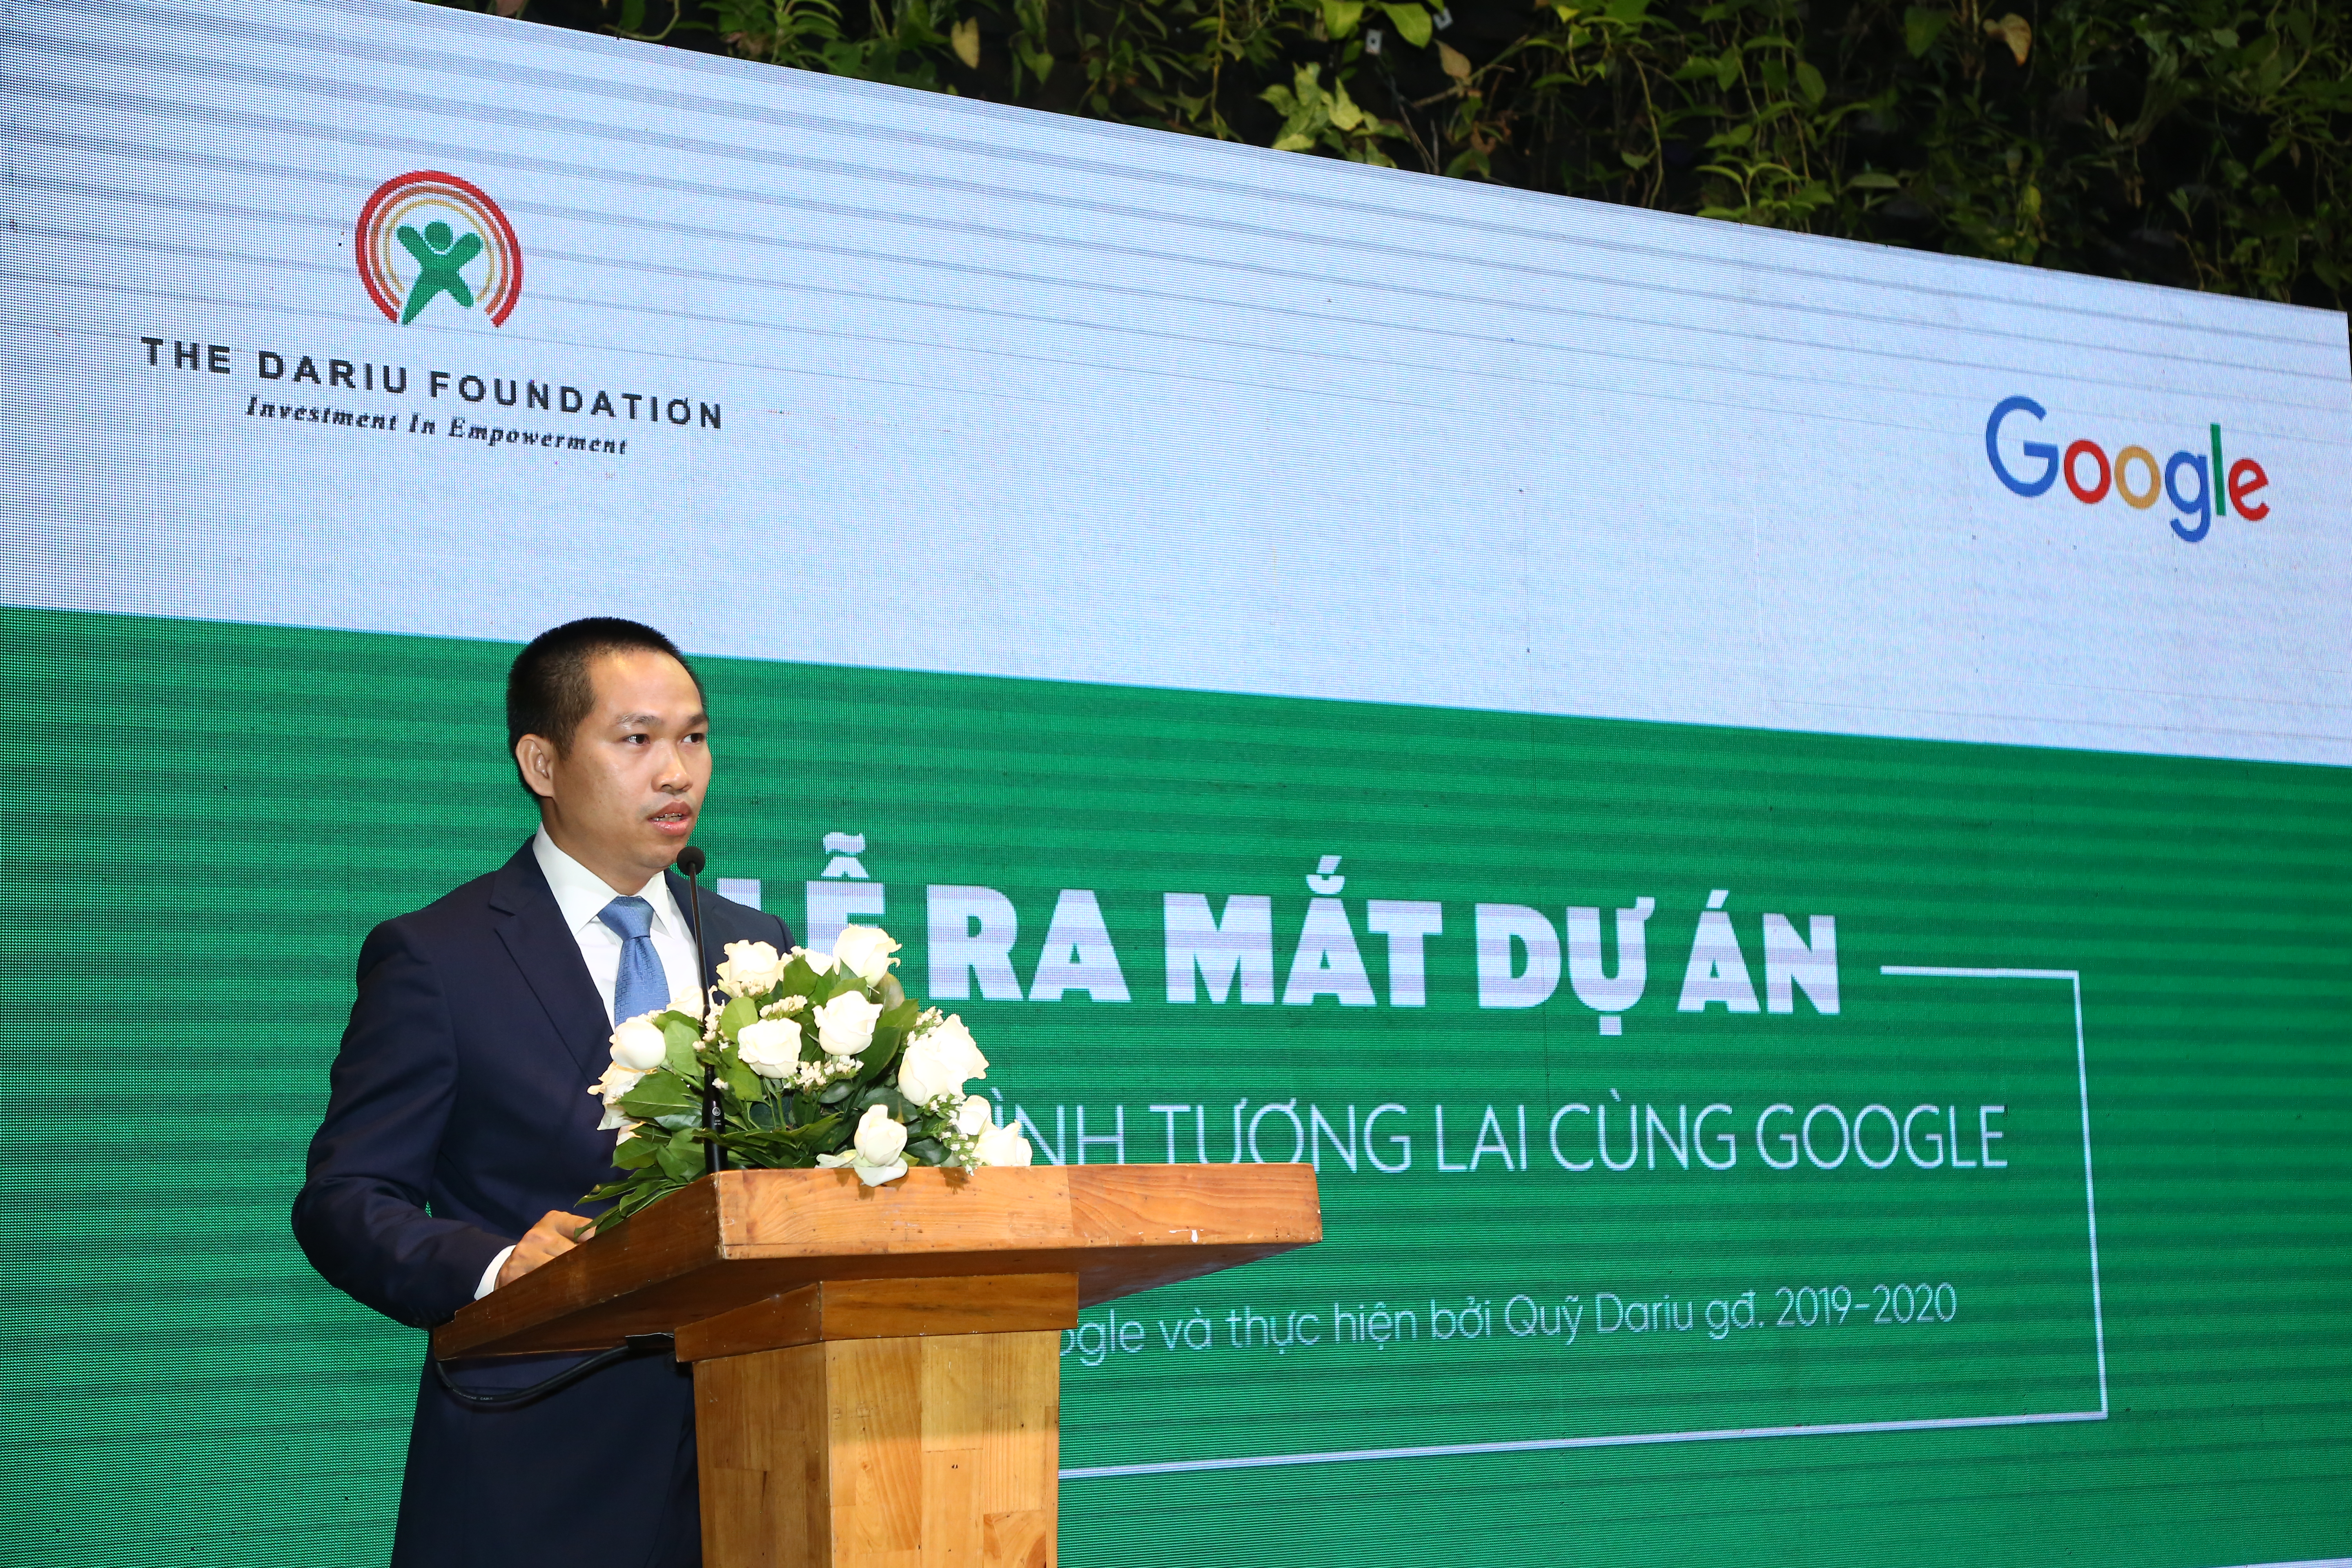 Nguyen Van Hanh, general manager of the Dariu Foundation, speaks at the launch of the second phase of the ‘Coding your future with Google’ project in Ho Chi Minh City on December 5, 2019. Photo: Google